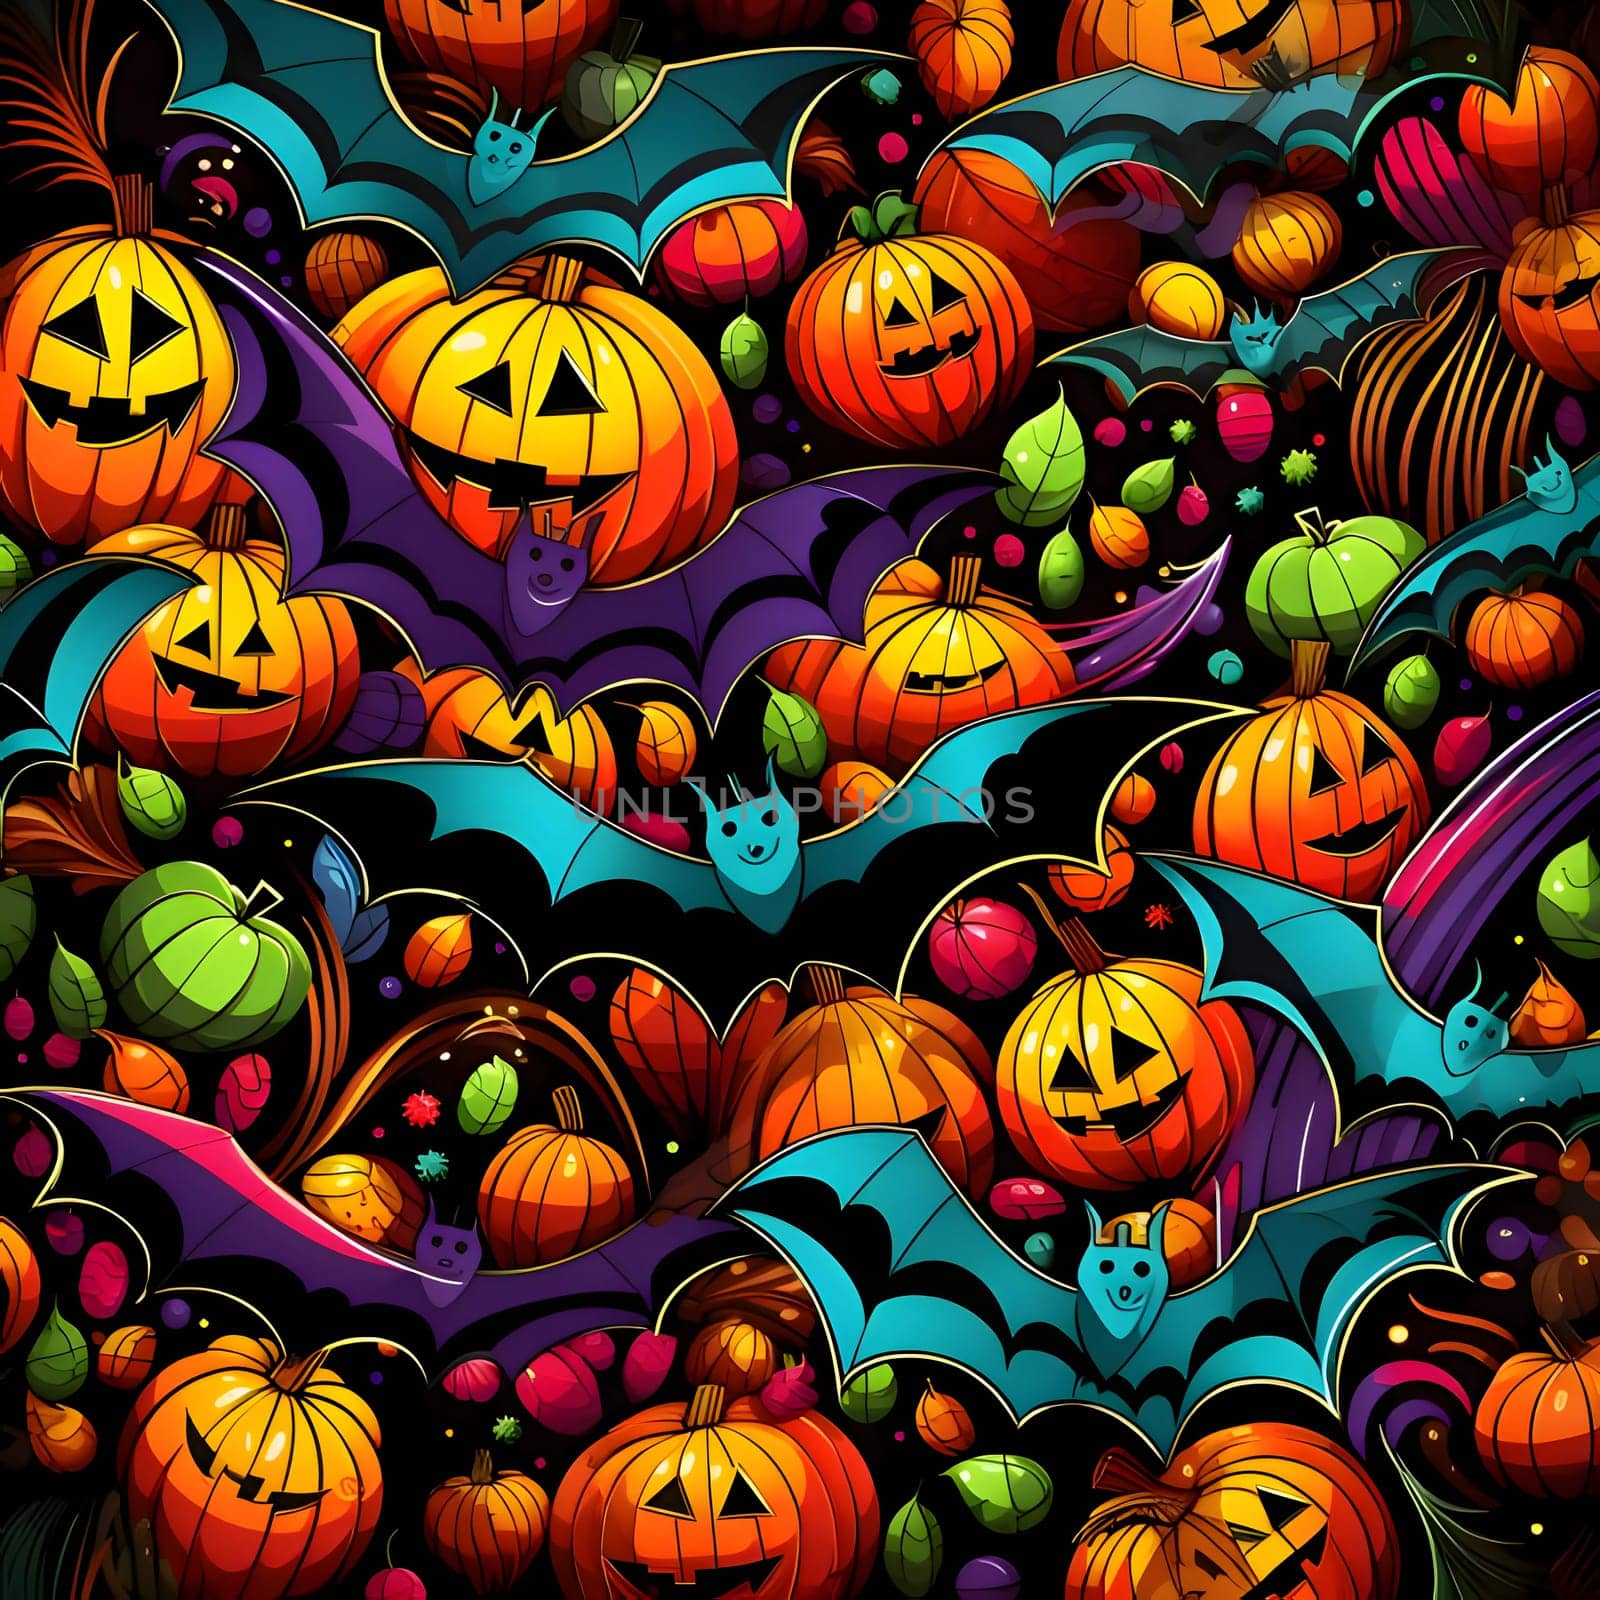 Patterns and banners backgrounds: Halloween seamless pattern with pumpkins and bats. Vector illustration.